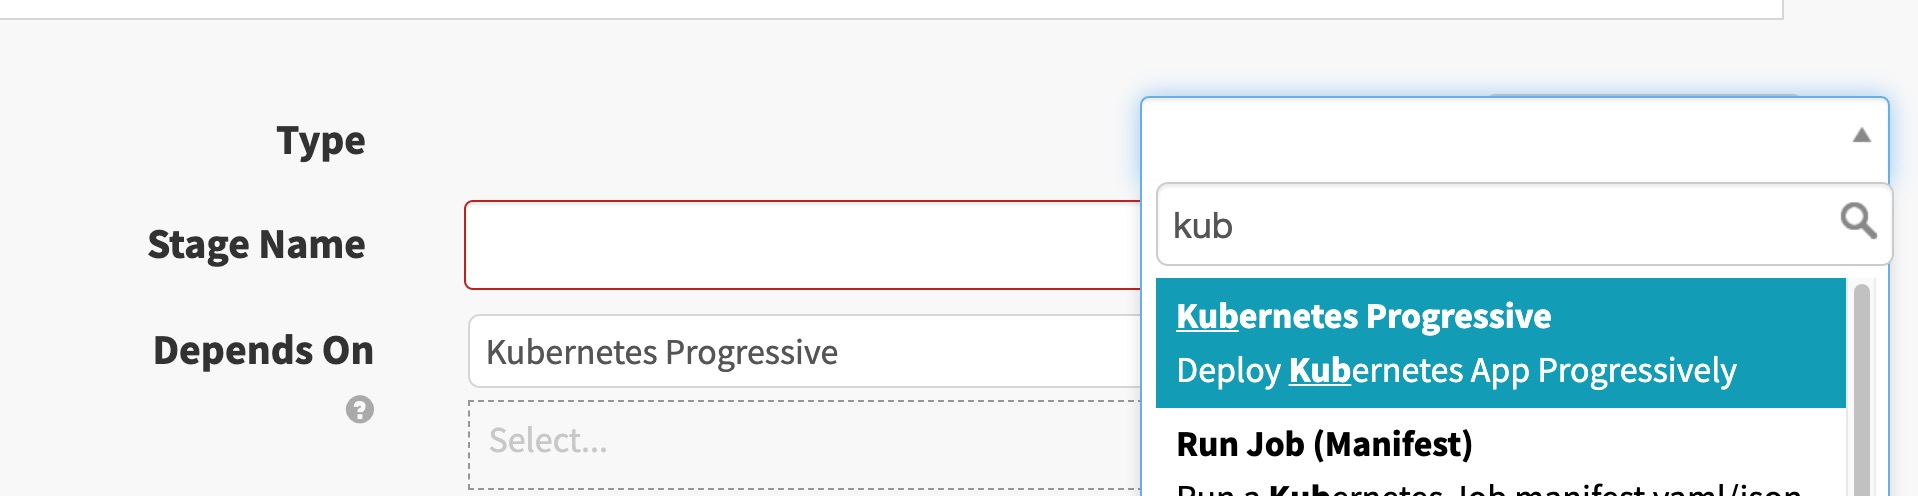 The Kubernetes Progressive stage appears in the Type dropdown when you search for it.